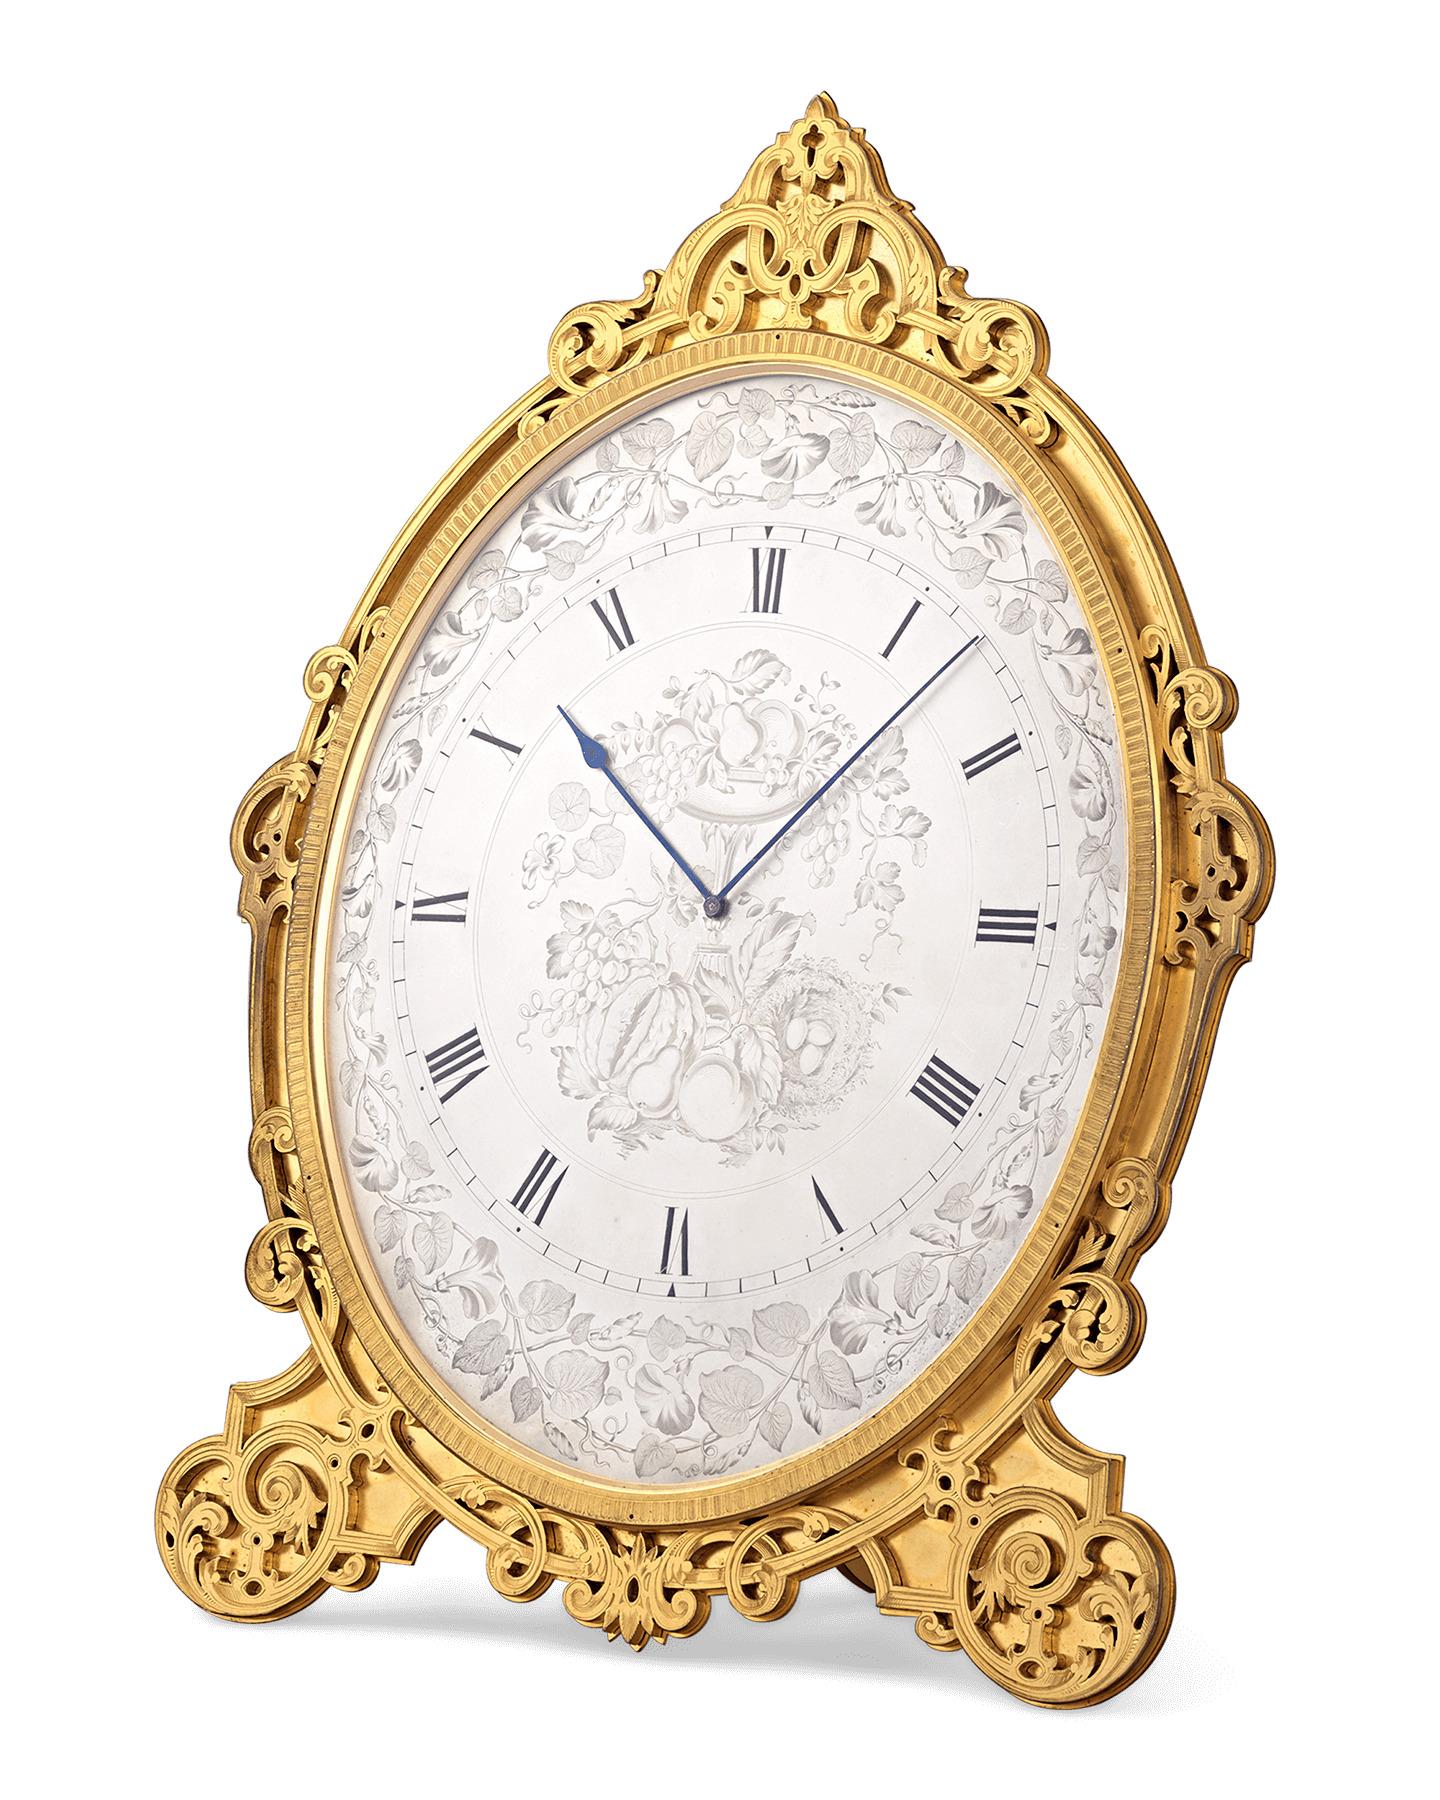 Crafted by the great Victorian clockmaker Thomas Cole, this elegantly gilded 30-hour timepiece is a pristine example of the portable “strut clocks” which skyrocketed the English horologist’s fame. The oval dial features a silvered engraving of a